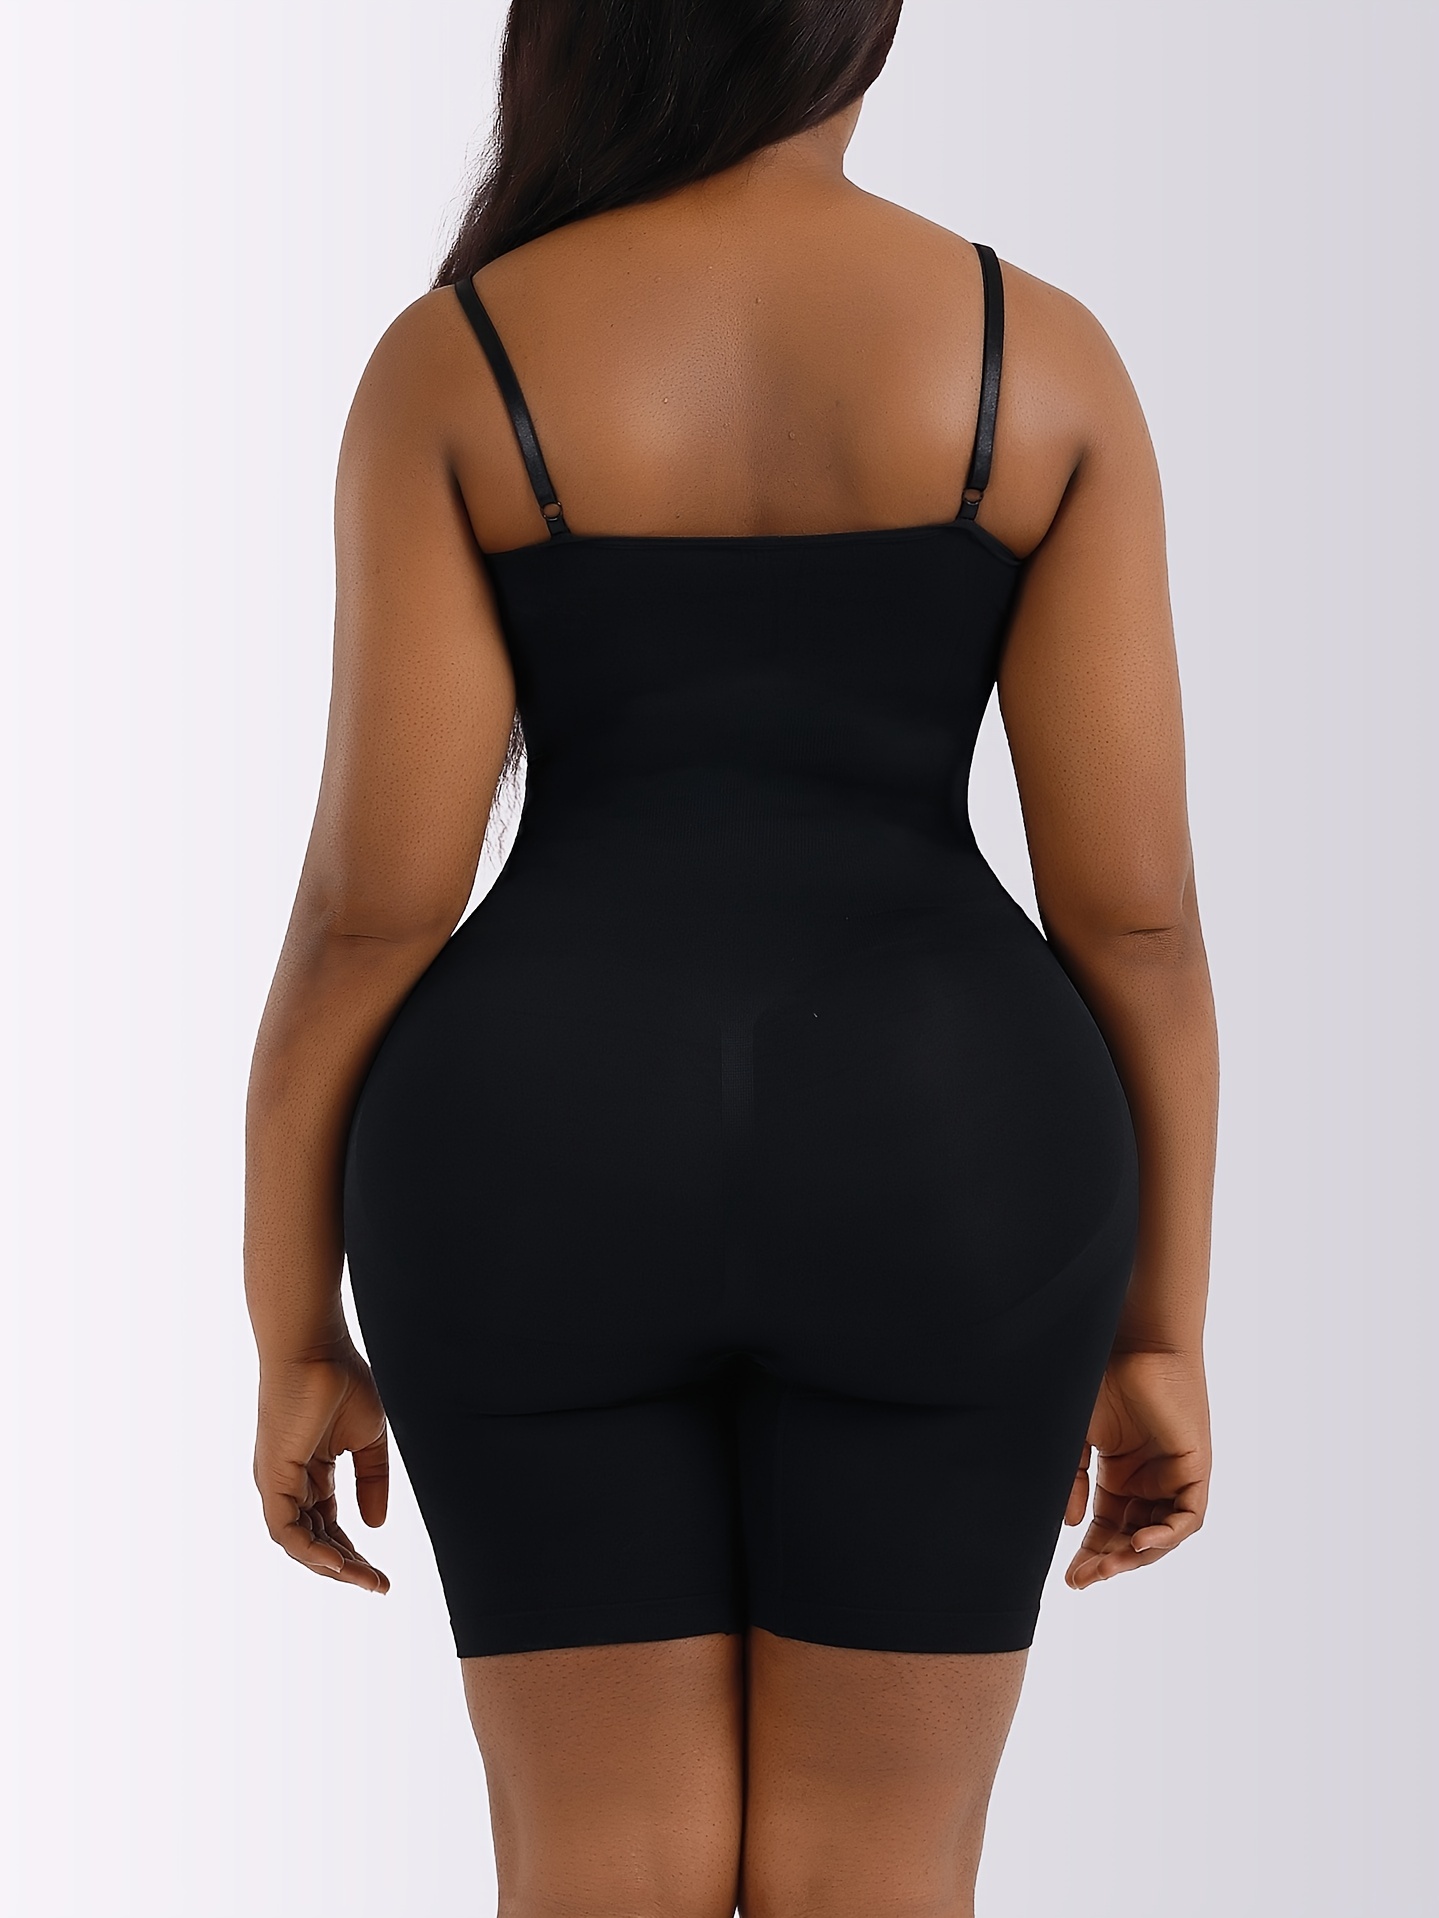 Women's Plus Size Shapewear Lightweight and Breathable Zipper-breasted  Bodysuits Tummy Control Full Body Shaper(Size:Large,Color:Black) price in  UAE,  UAE